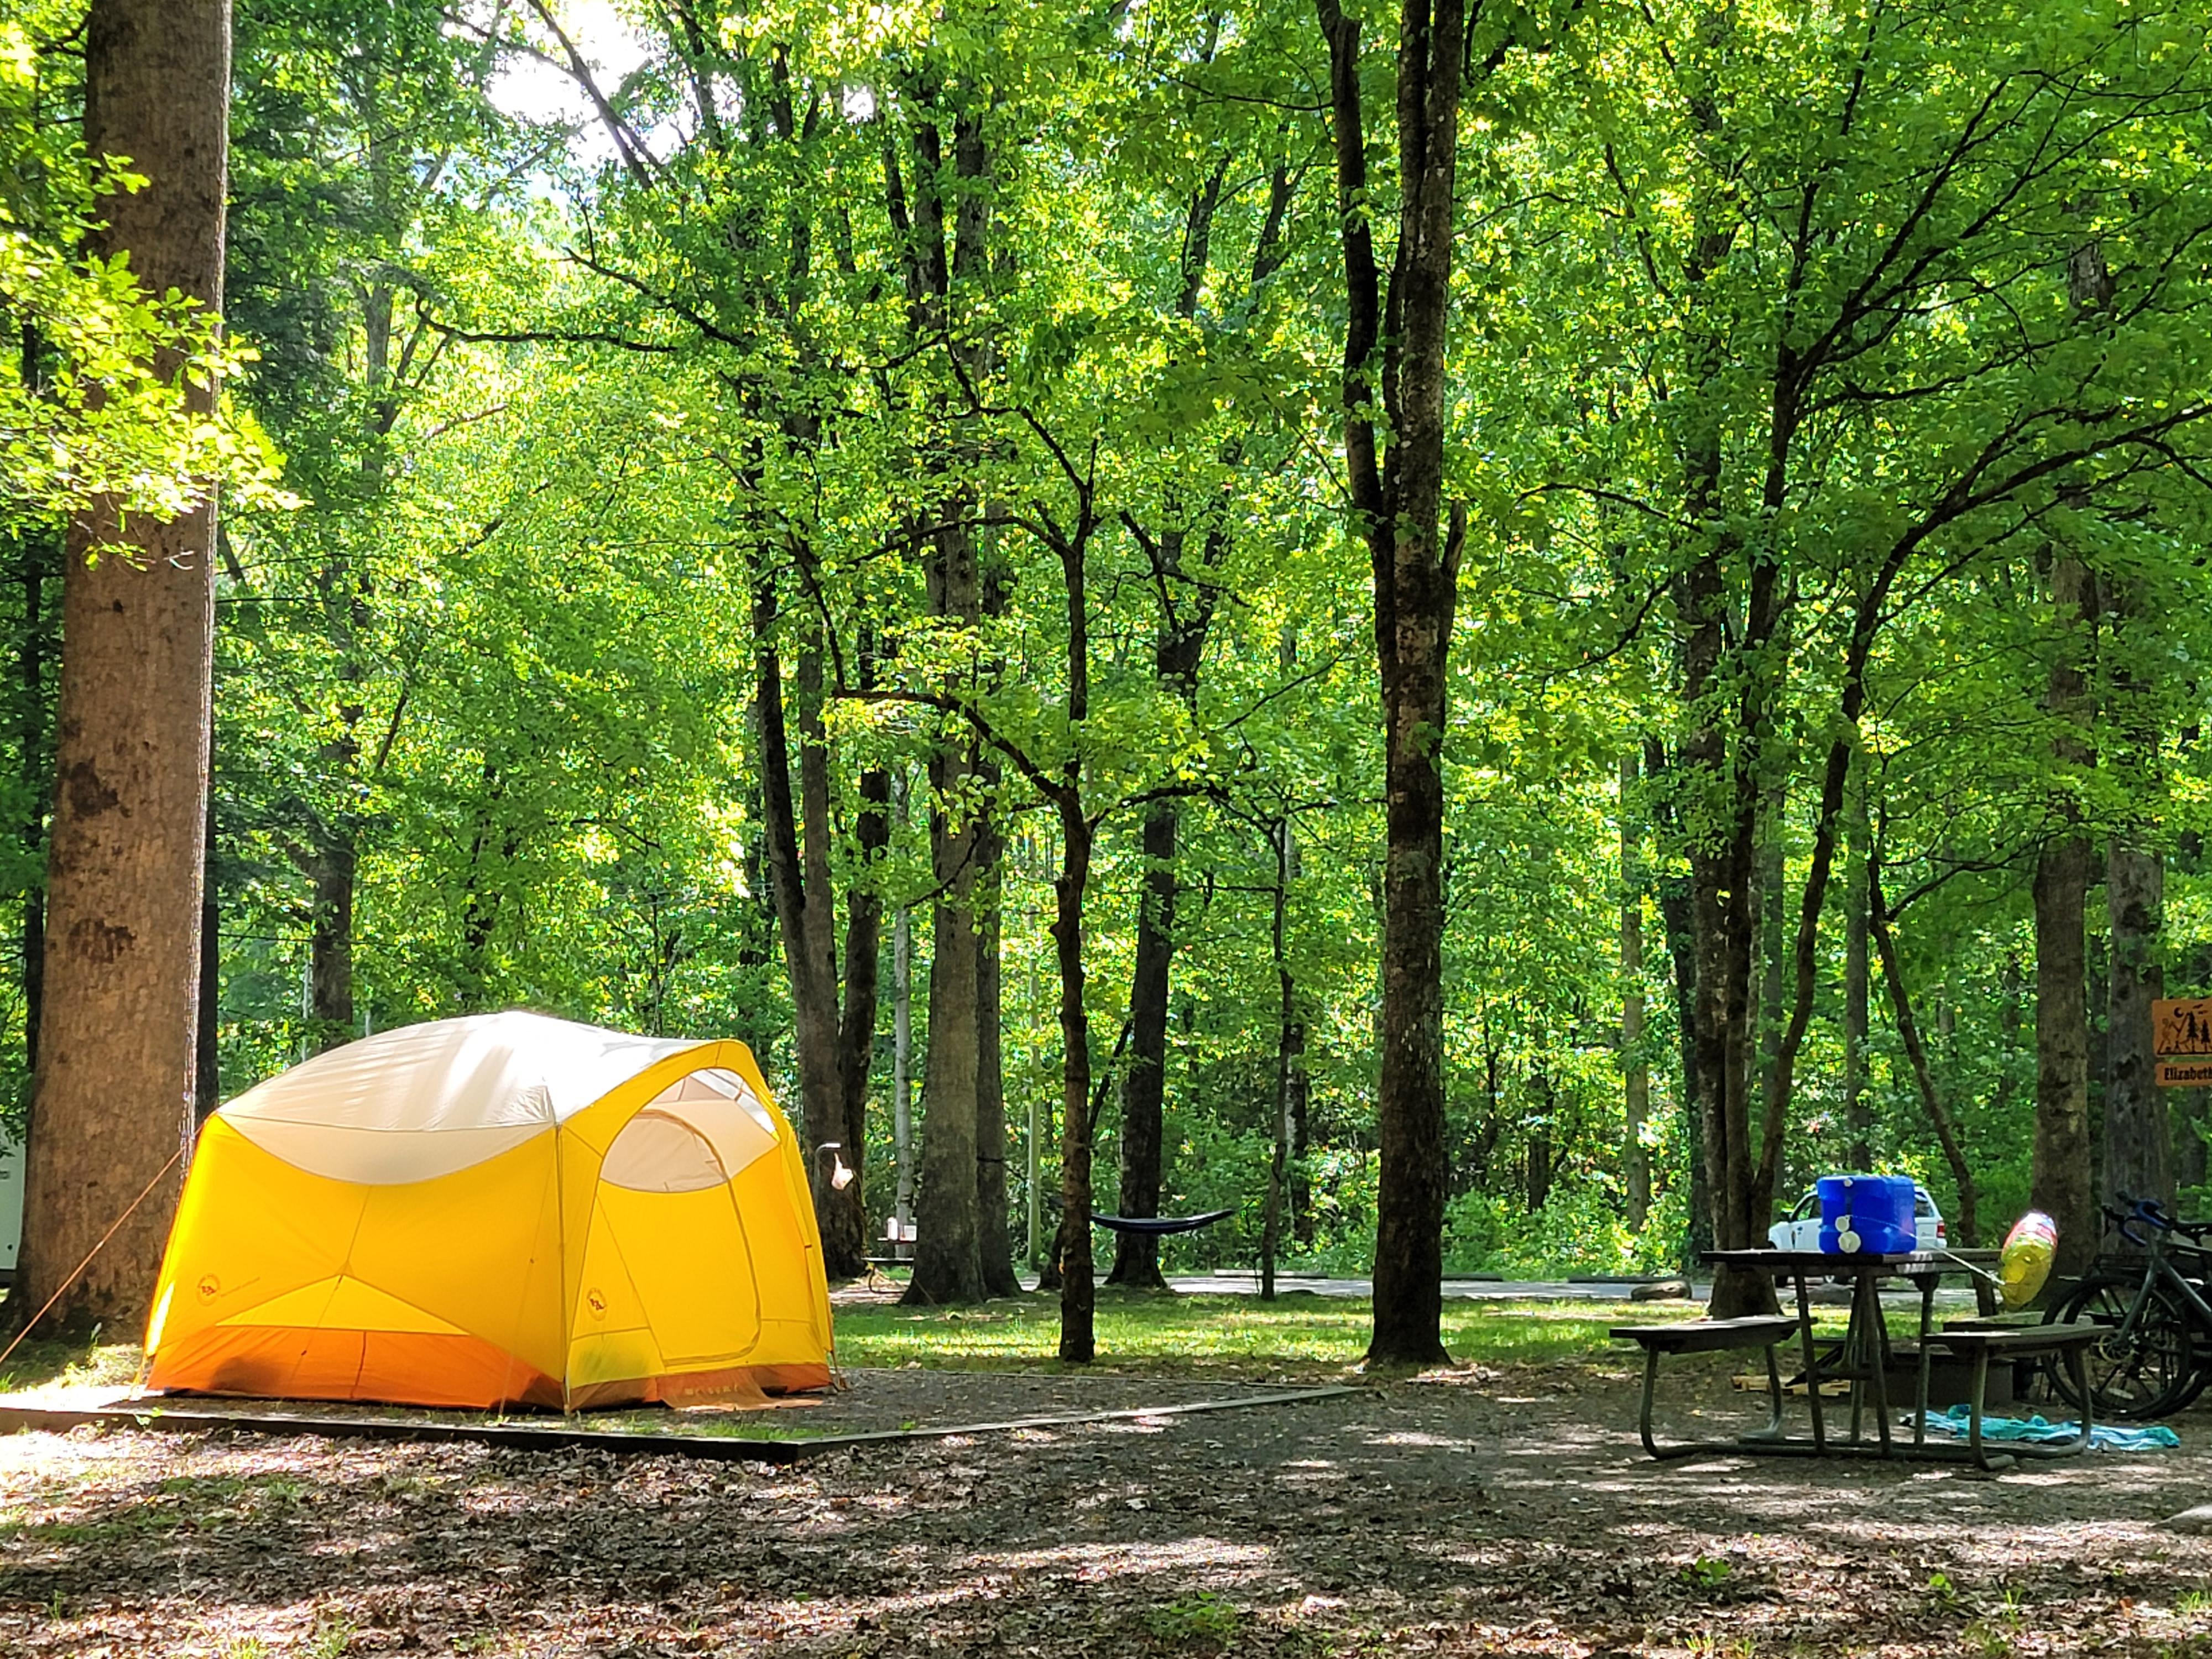 A yellow, orange, and white-colored tent on a level gravel pad near a picnic table and bikes.